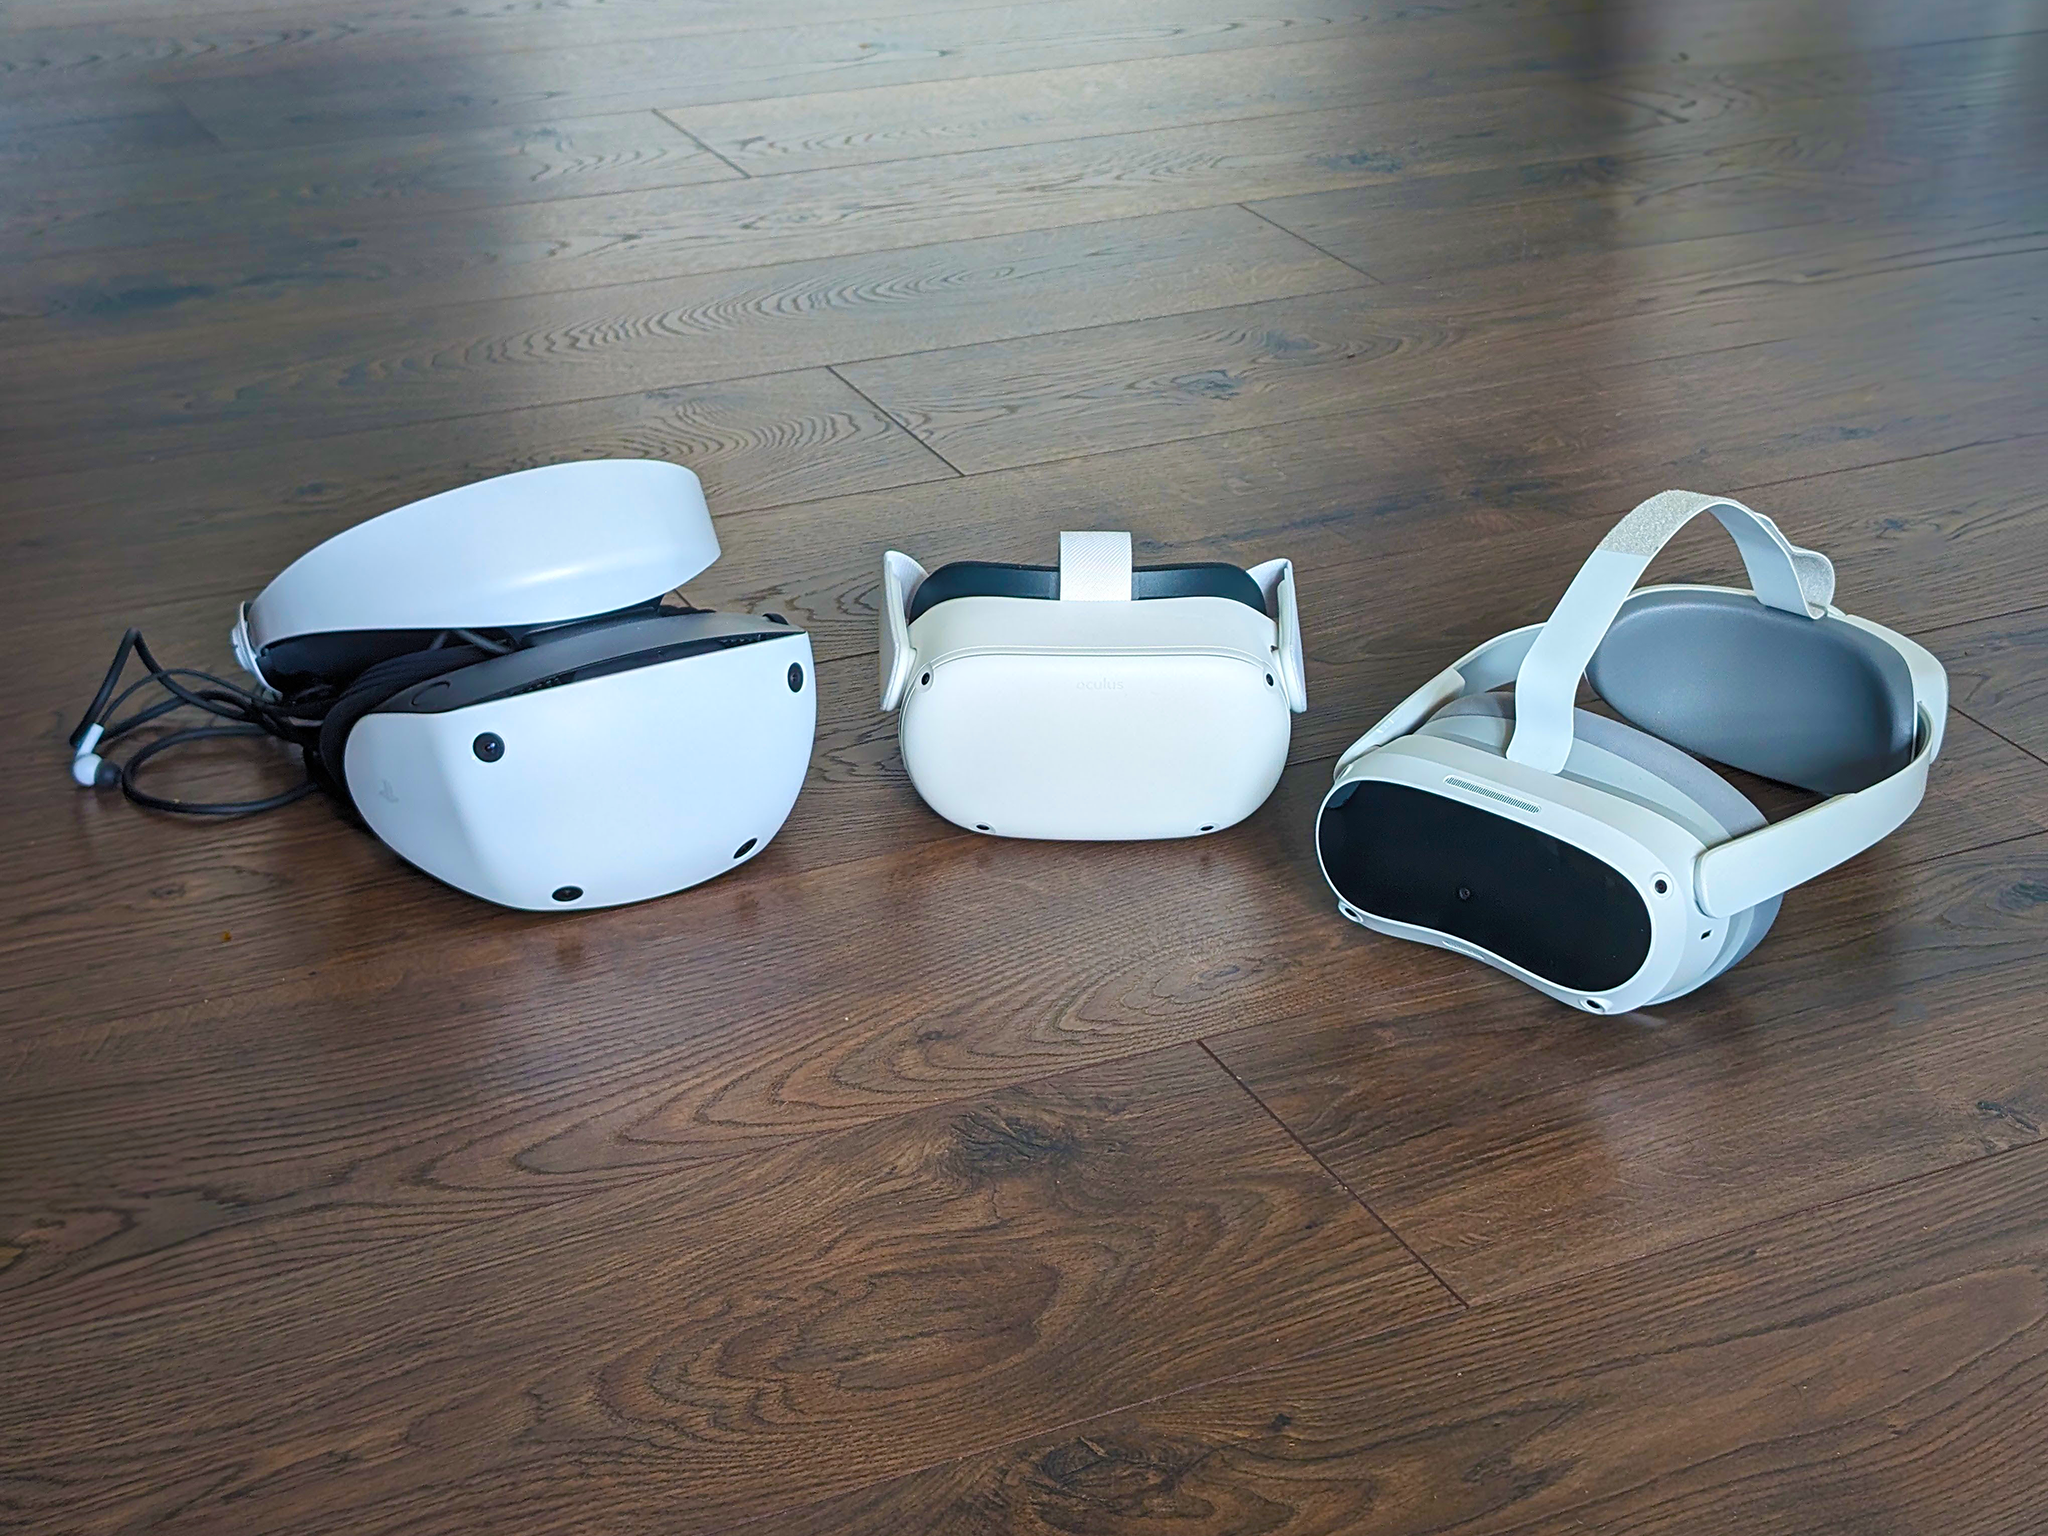 A selection of the best VR headsets that we tested for this review